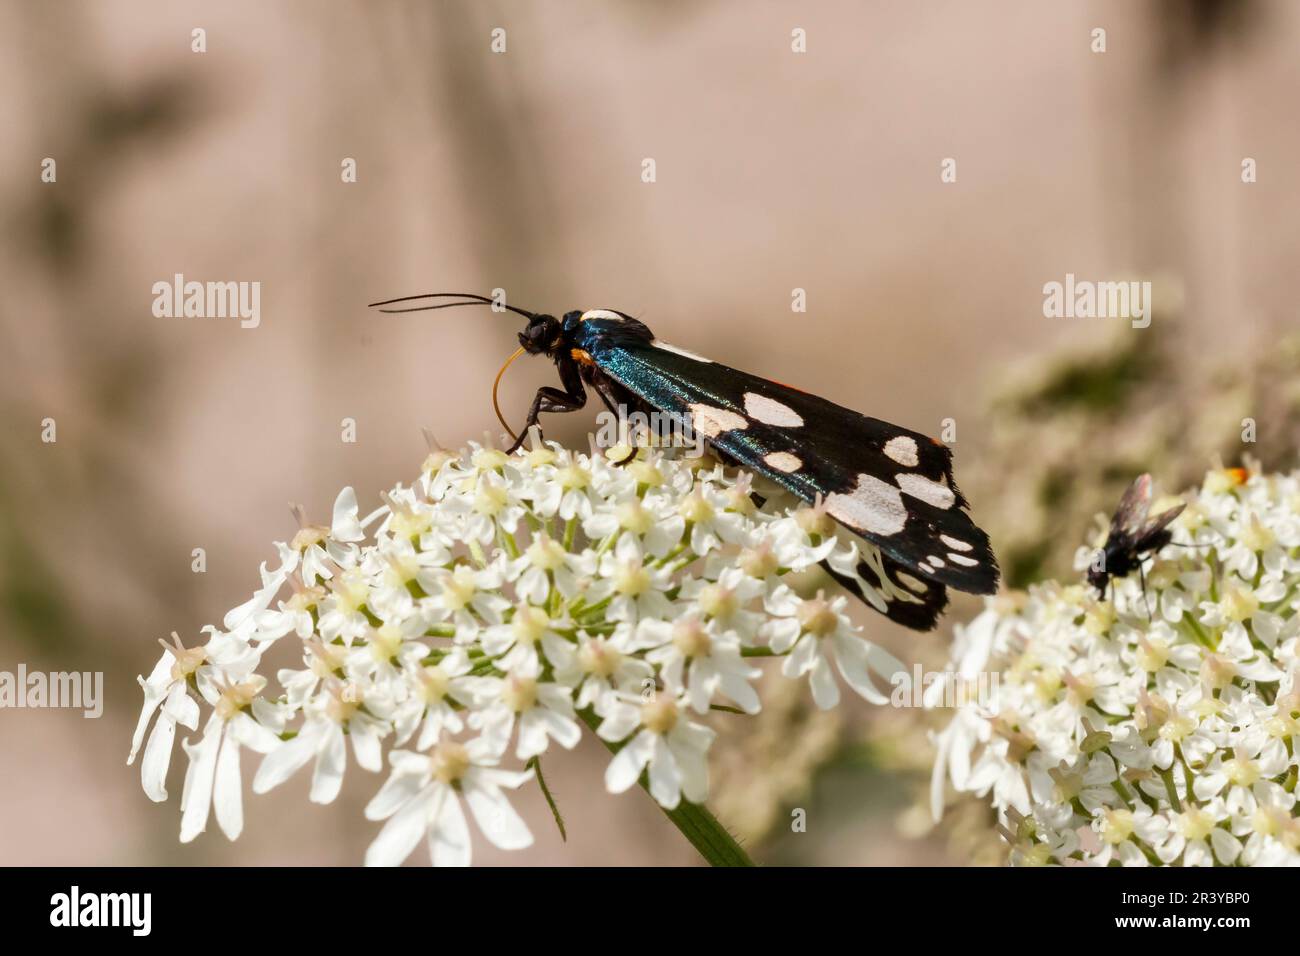 Callimorpha dominula, commonly known as Scarlet tiger moth Stock Photo